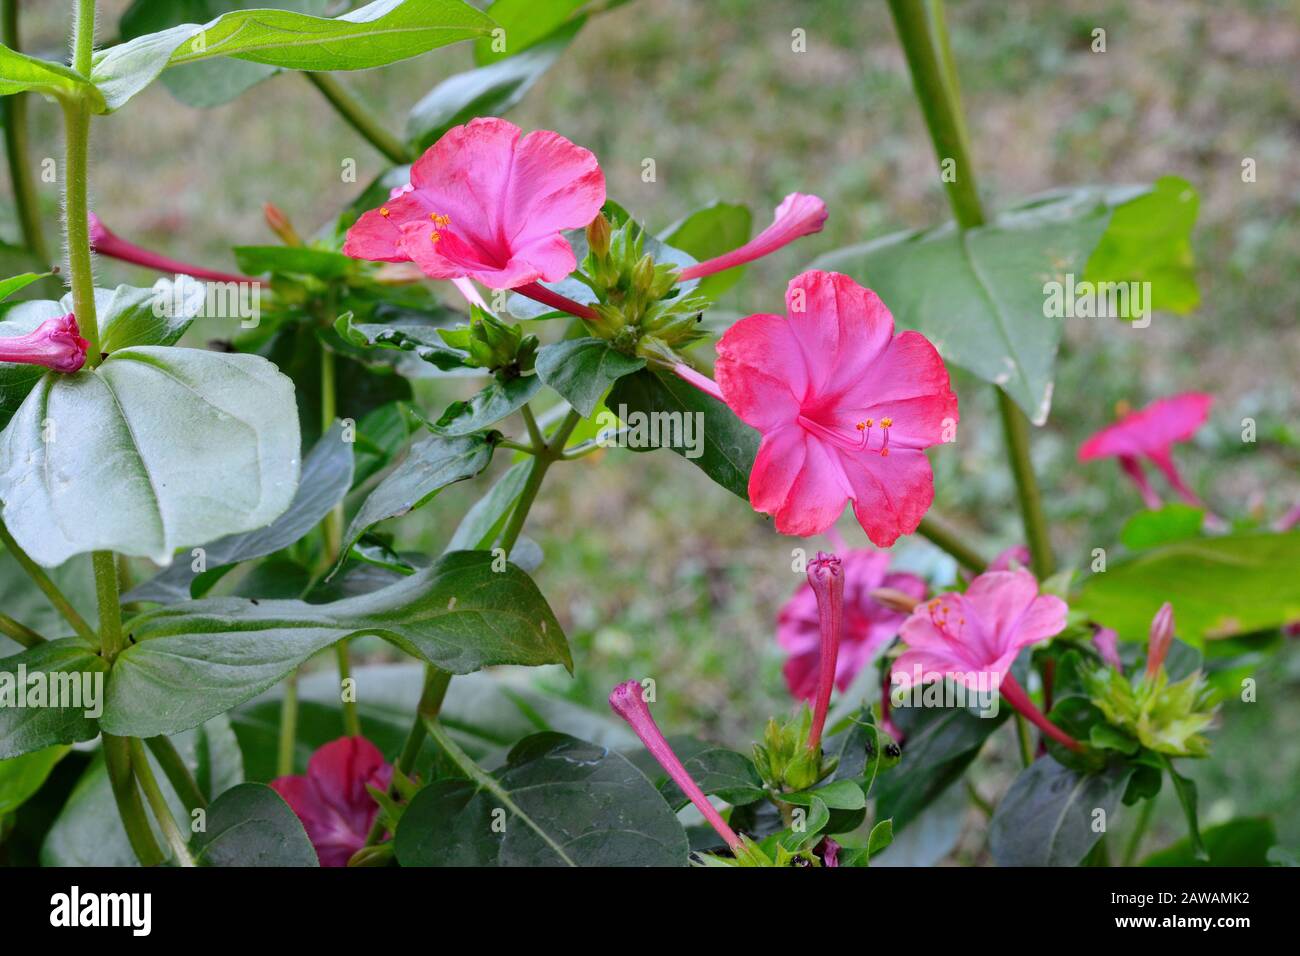 Four O Clock Flower High Resolution Stock Photography And Images Alamy